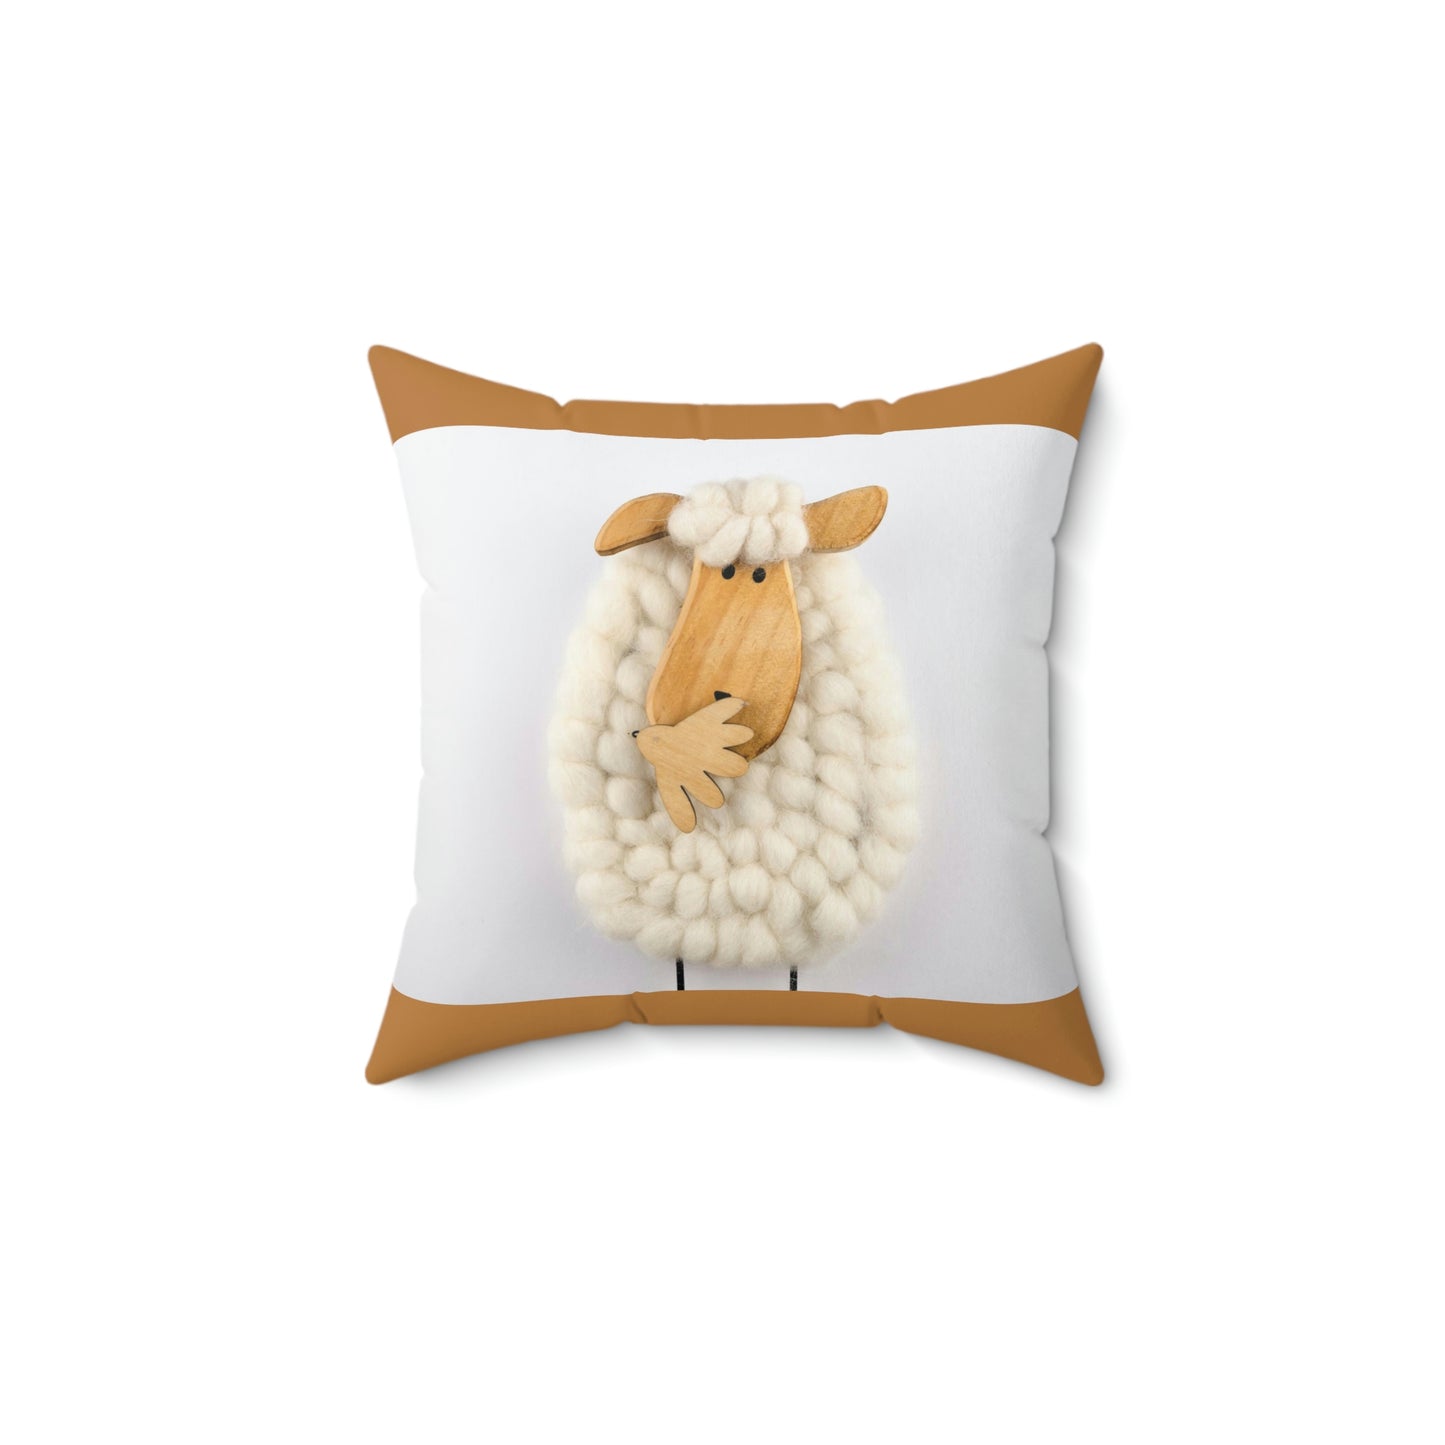 Sheep Pillow Case - Gold and White Colors - Faux Suede Square Pillow Case